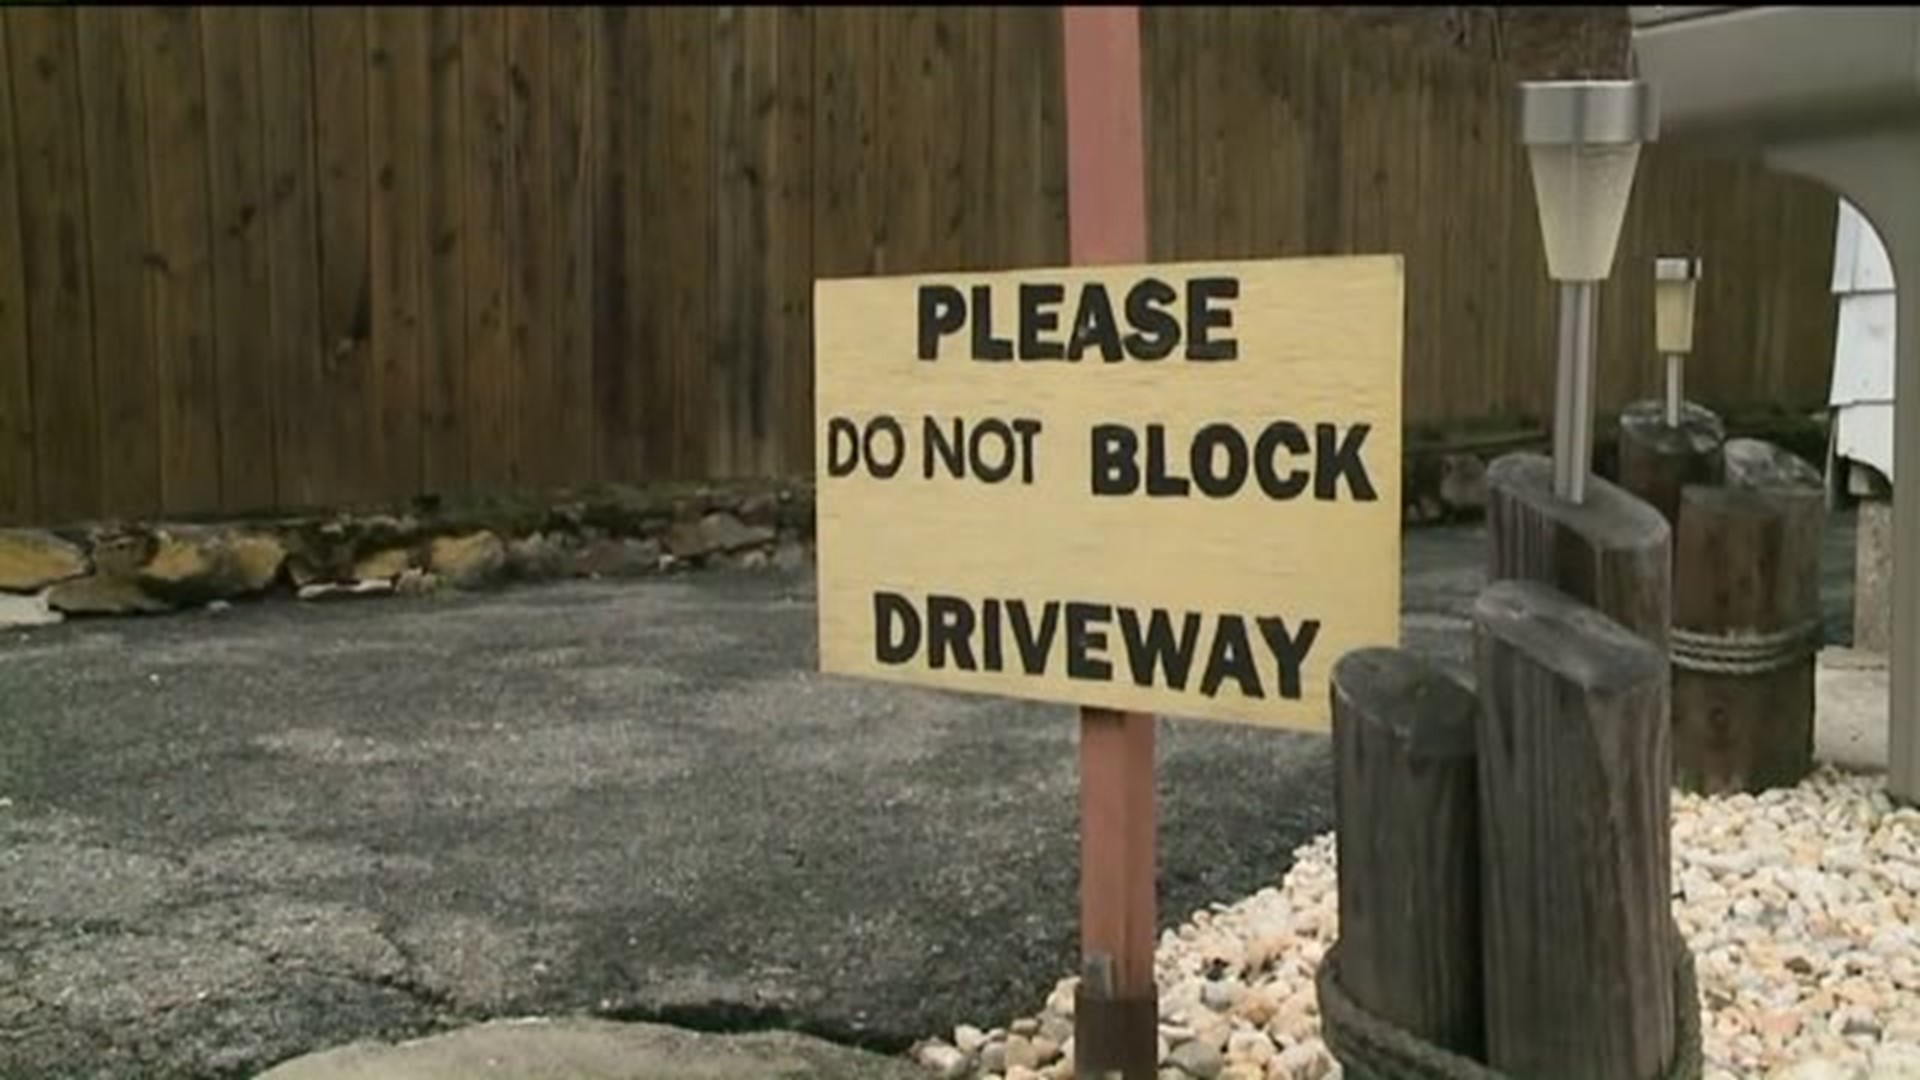 Jim Thorpe Officials Looking to Fix Parking Issues